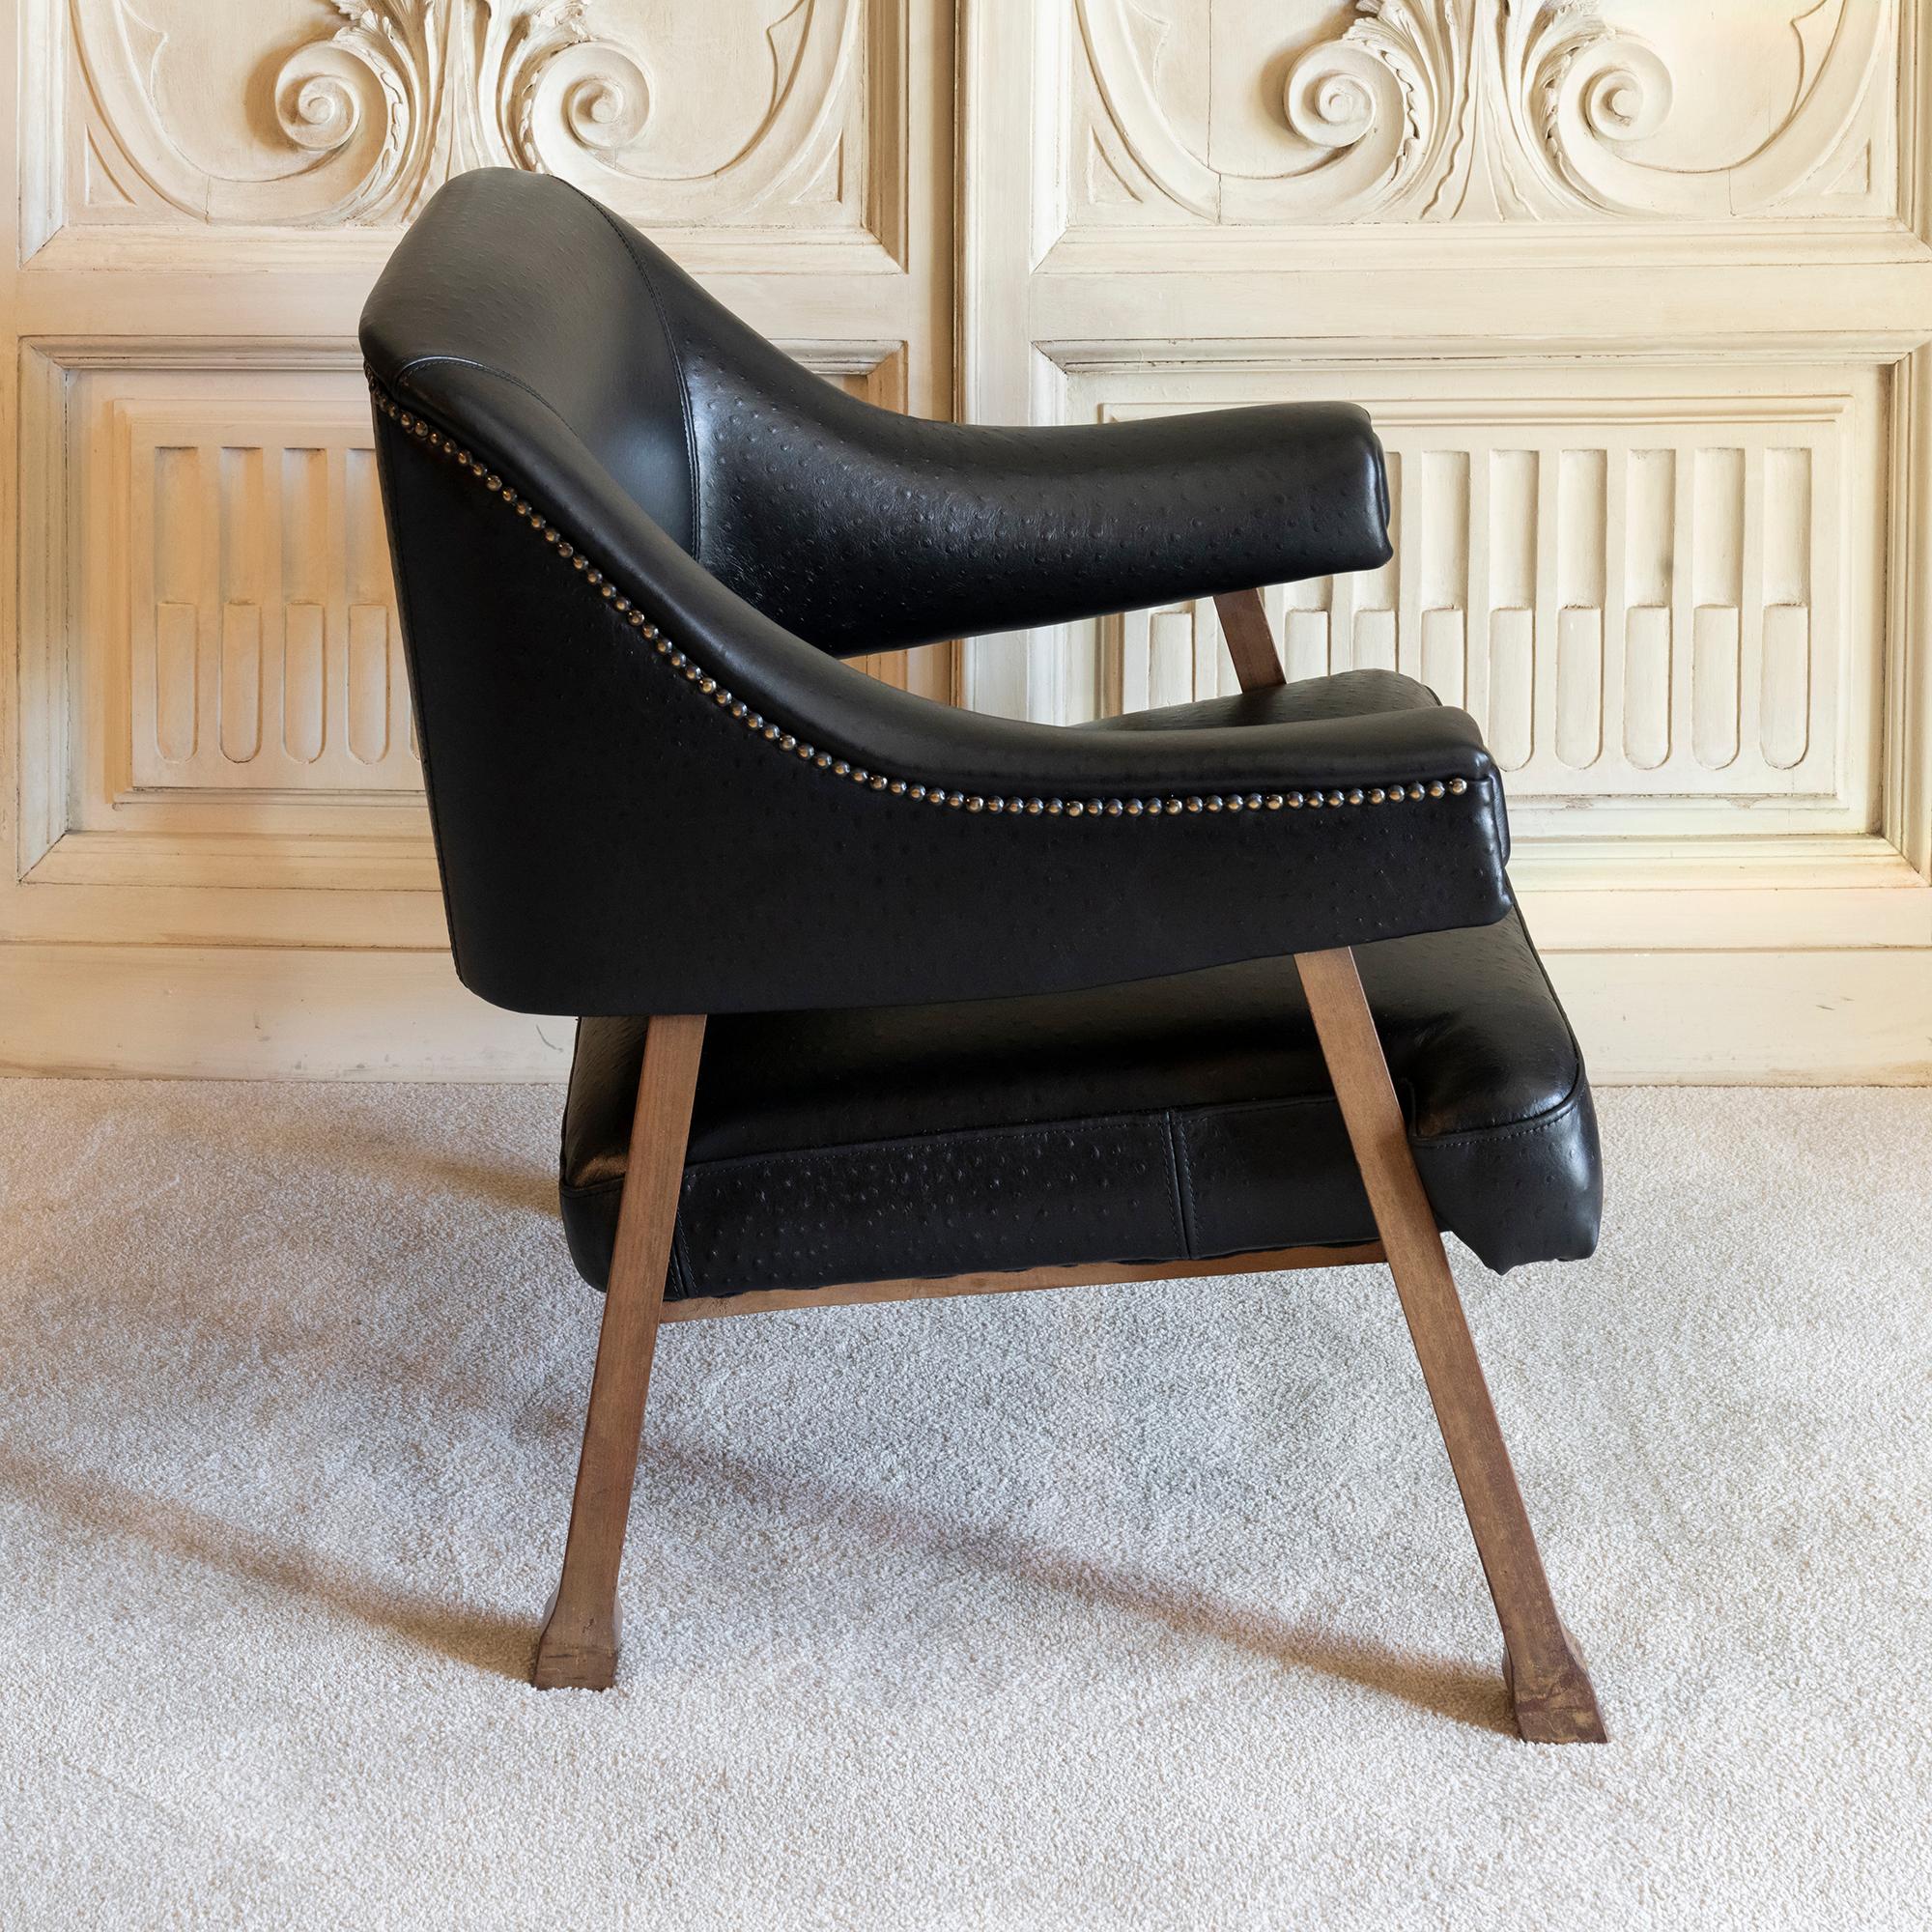 Late 20th Century Raffaella Crespi Italian Armchair Wood and Black Leather In Good Condition For Sale In Firenze, IT